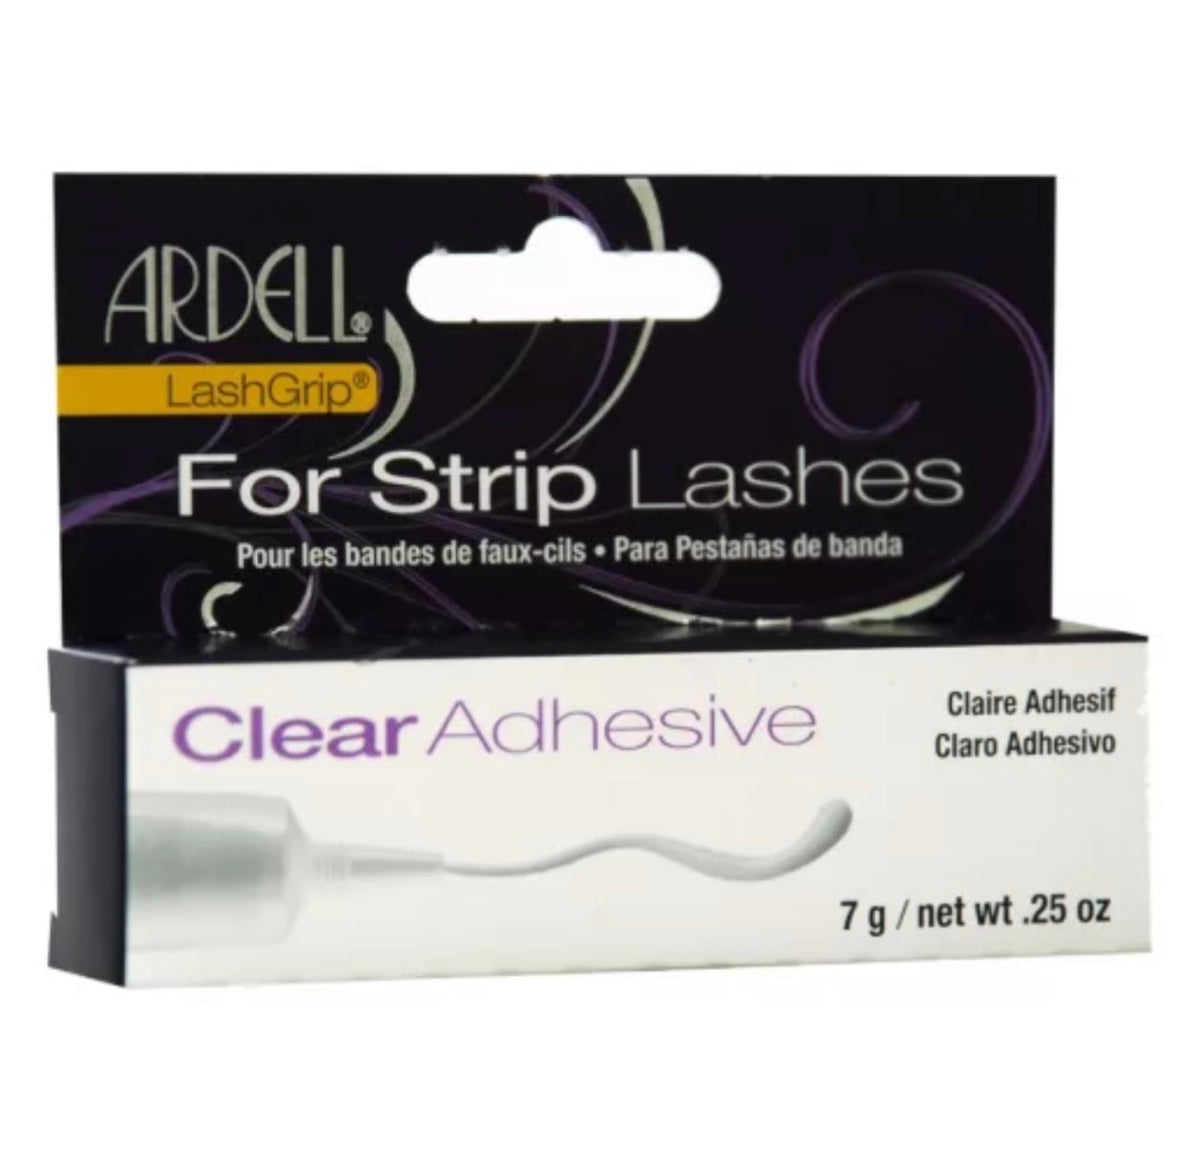 Ardell LashGrip for Strip Lashes